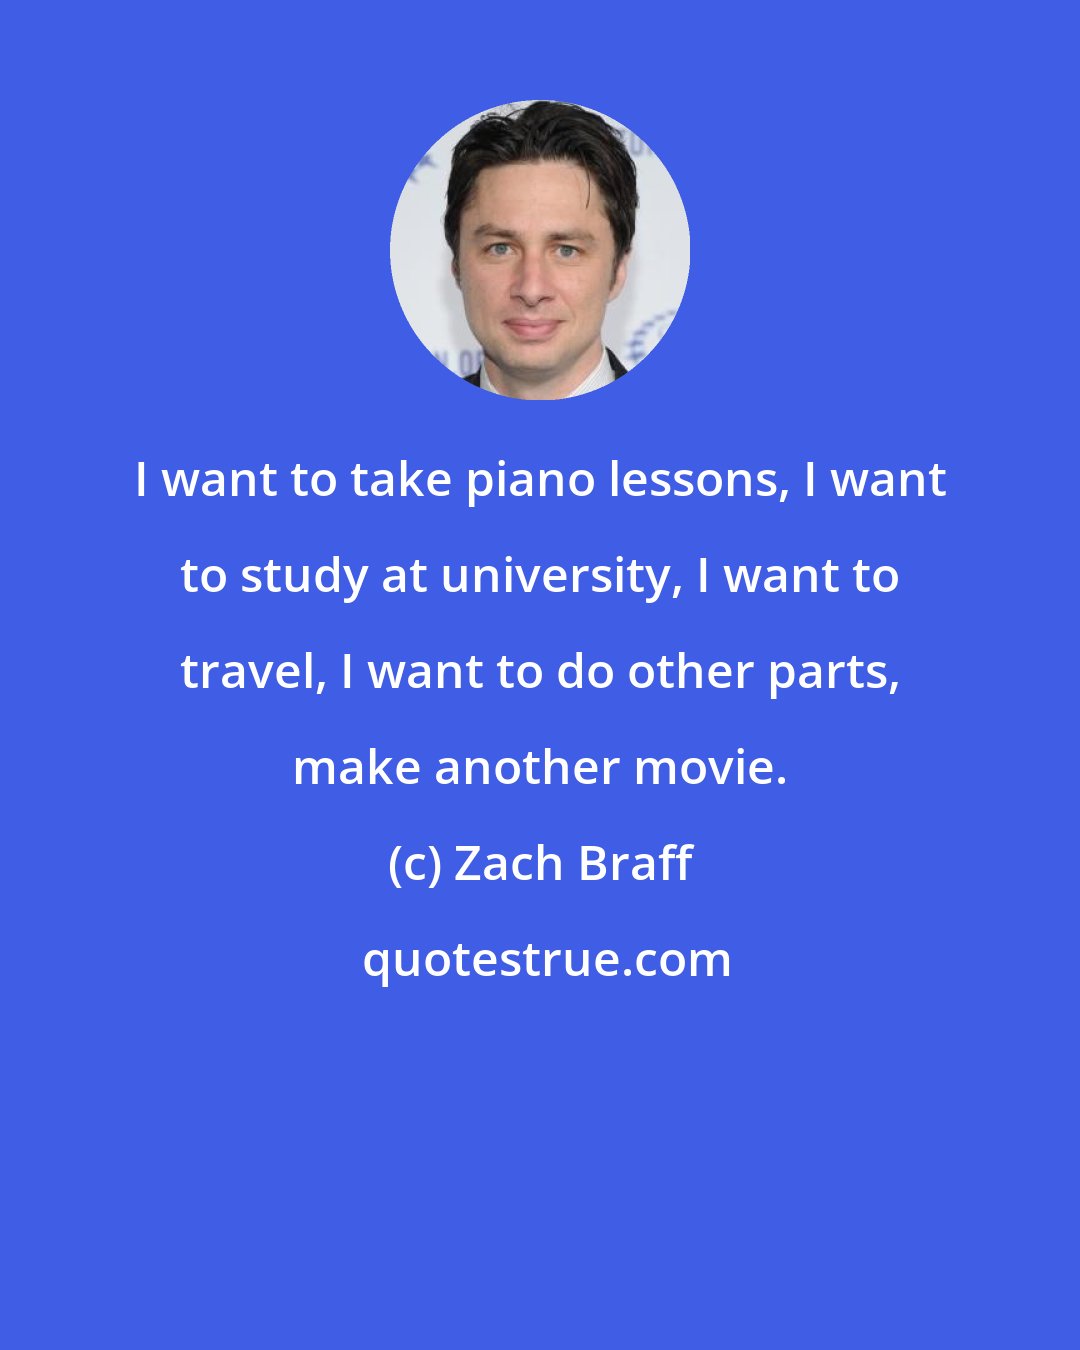 Zach Braff: I want to take piano lessons, I want to study at university, I want to travel, I want to do other parts, make another movie.